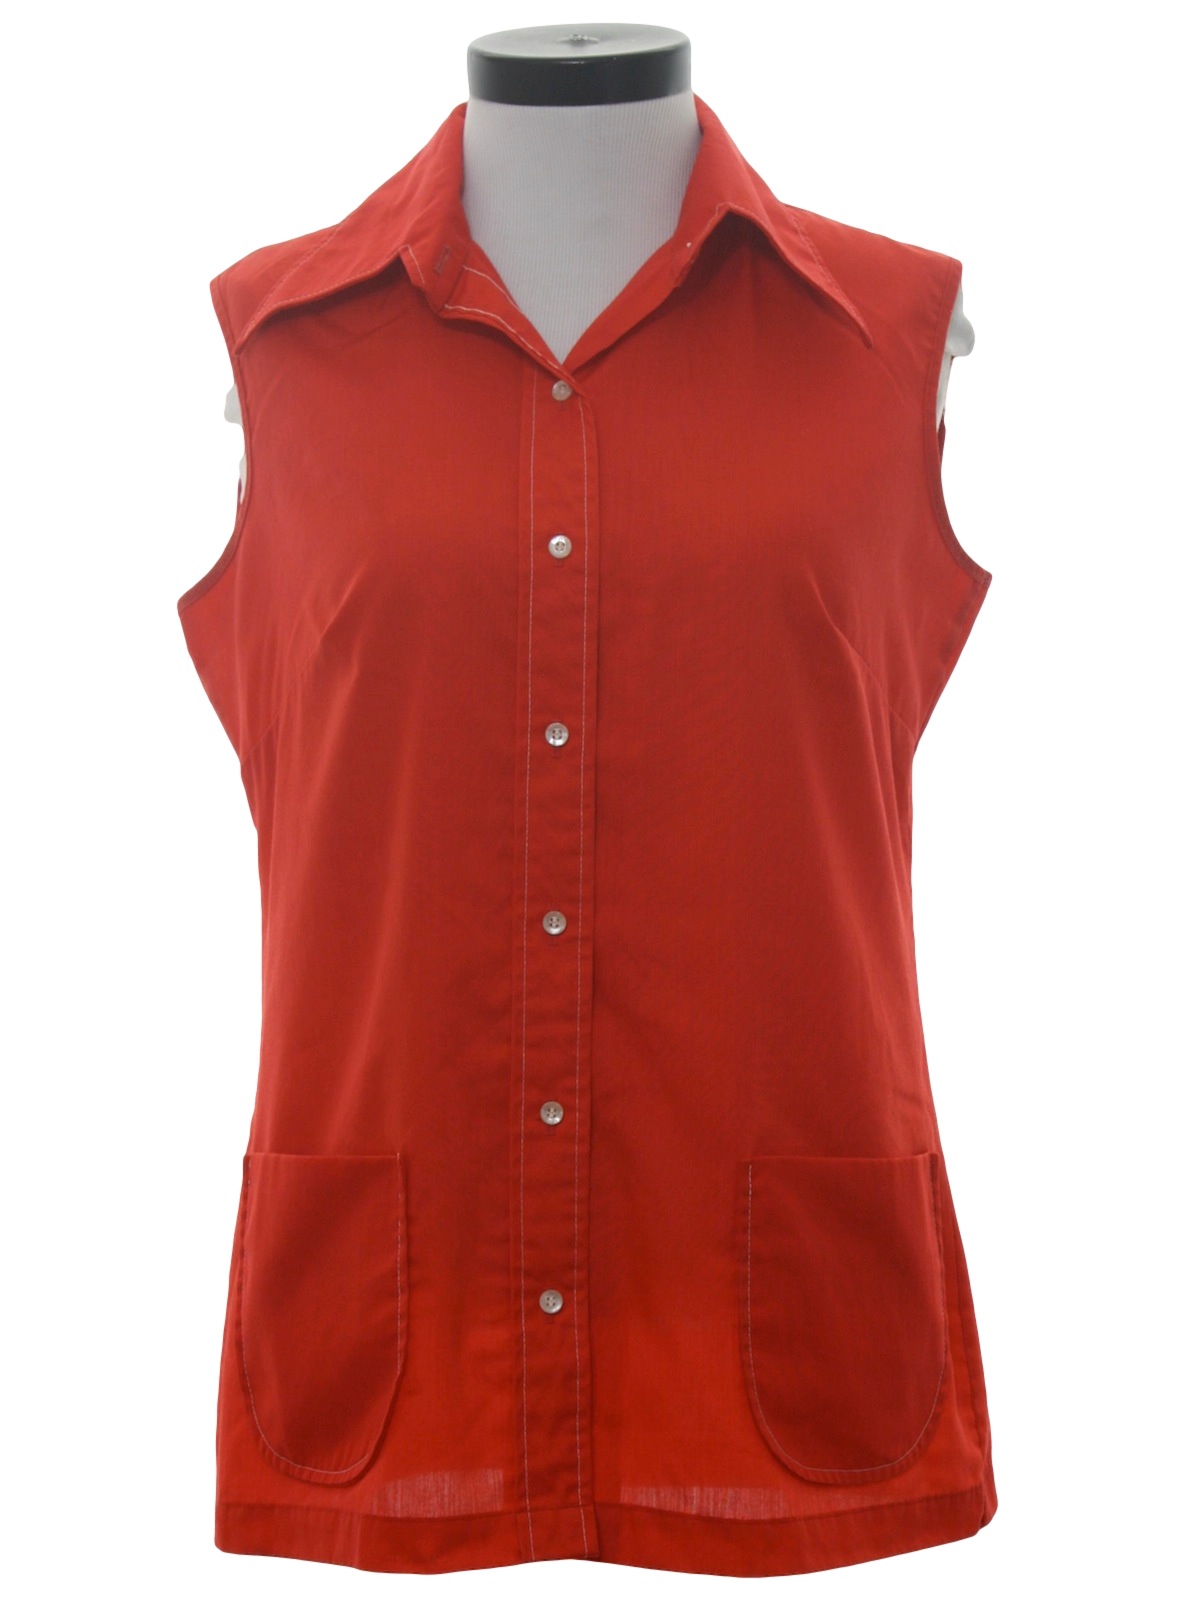 1970's Retro Shirt: 70s -no label- Womens red background polyester ...